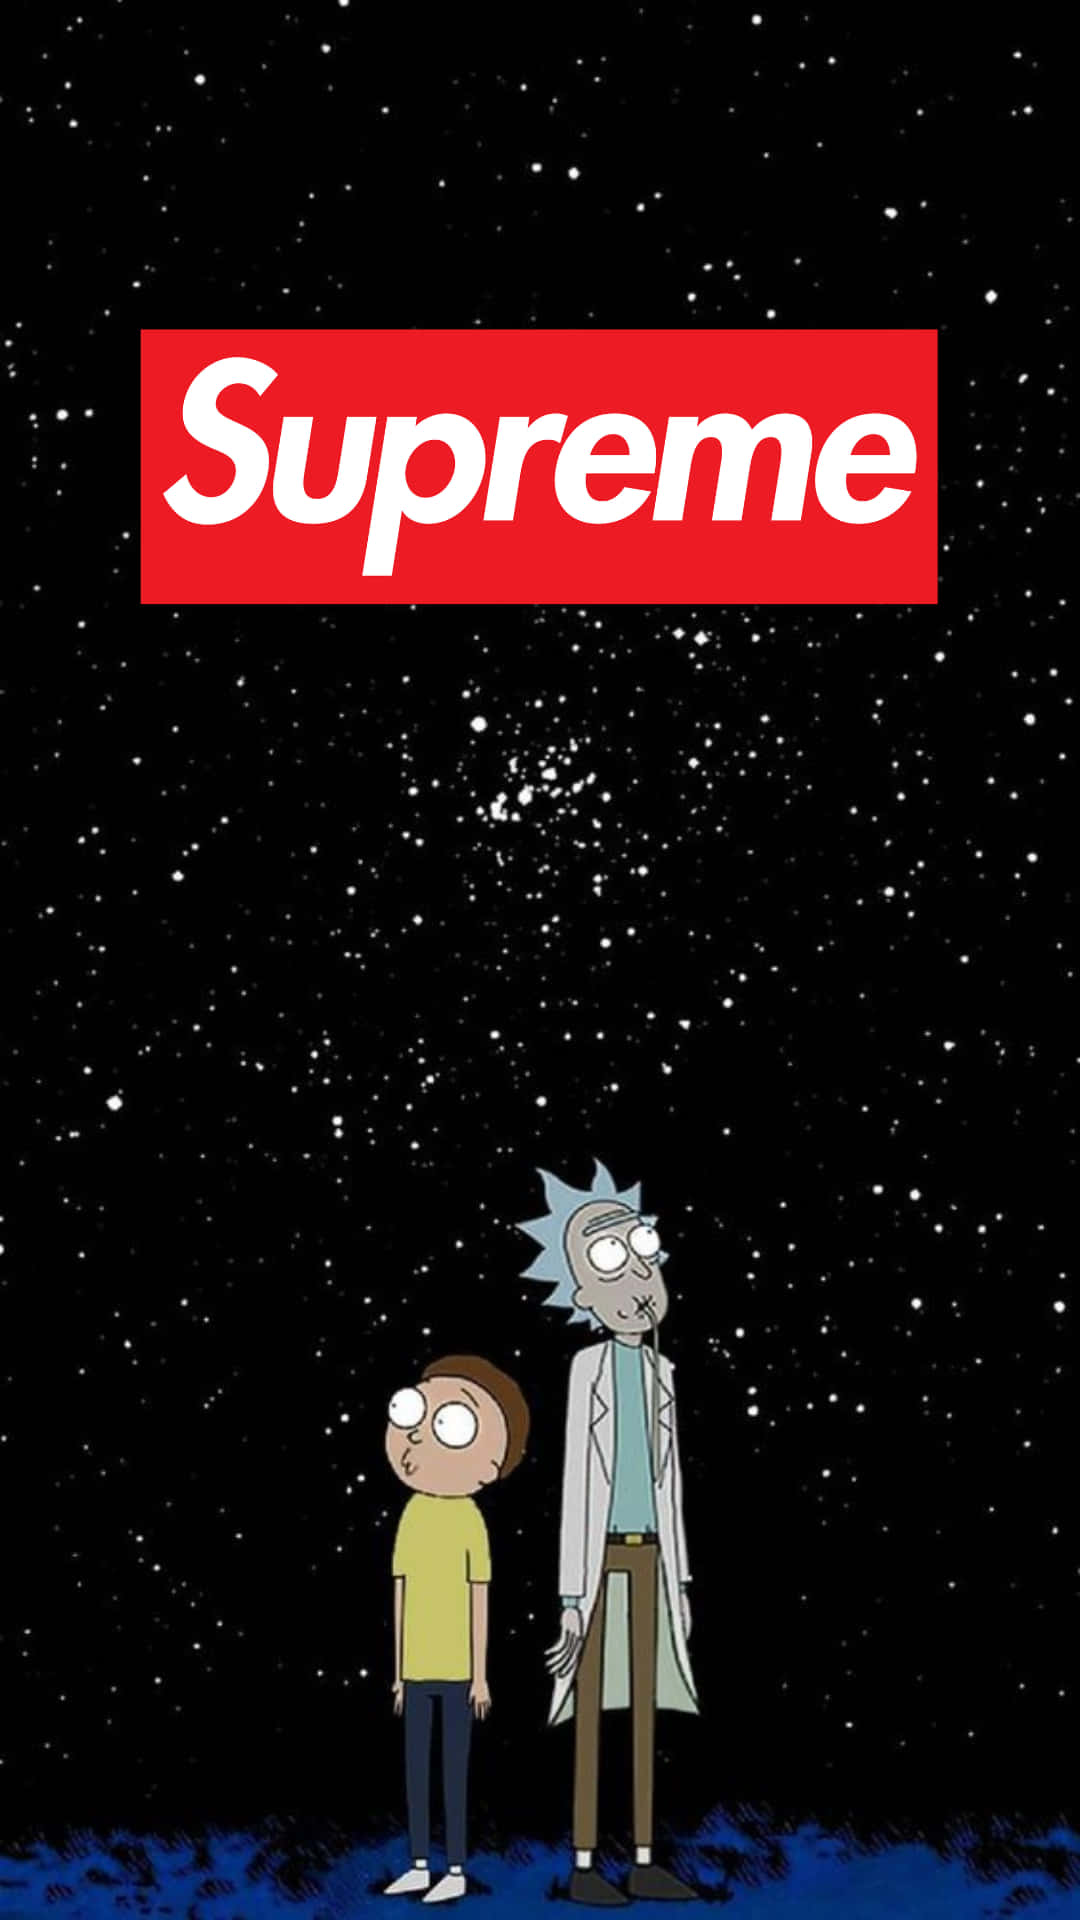 Top 25 Best Rick and Morty iPhone Wallpapers  GettyWallpapers